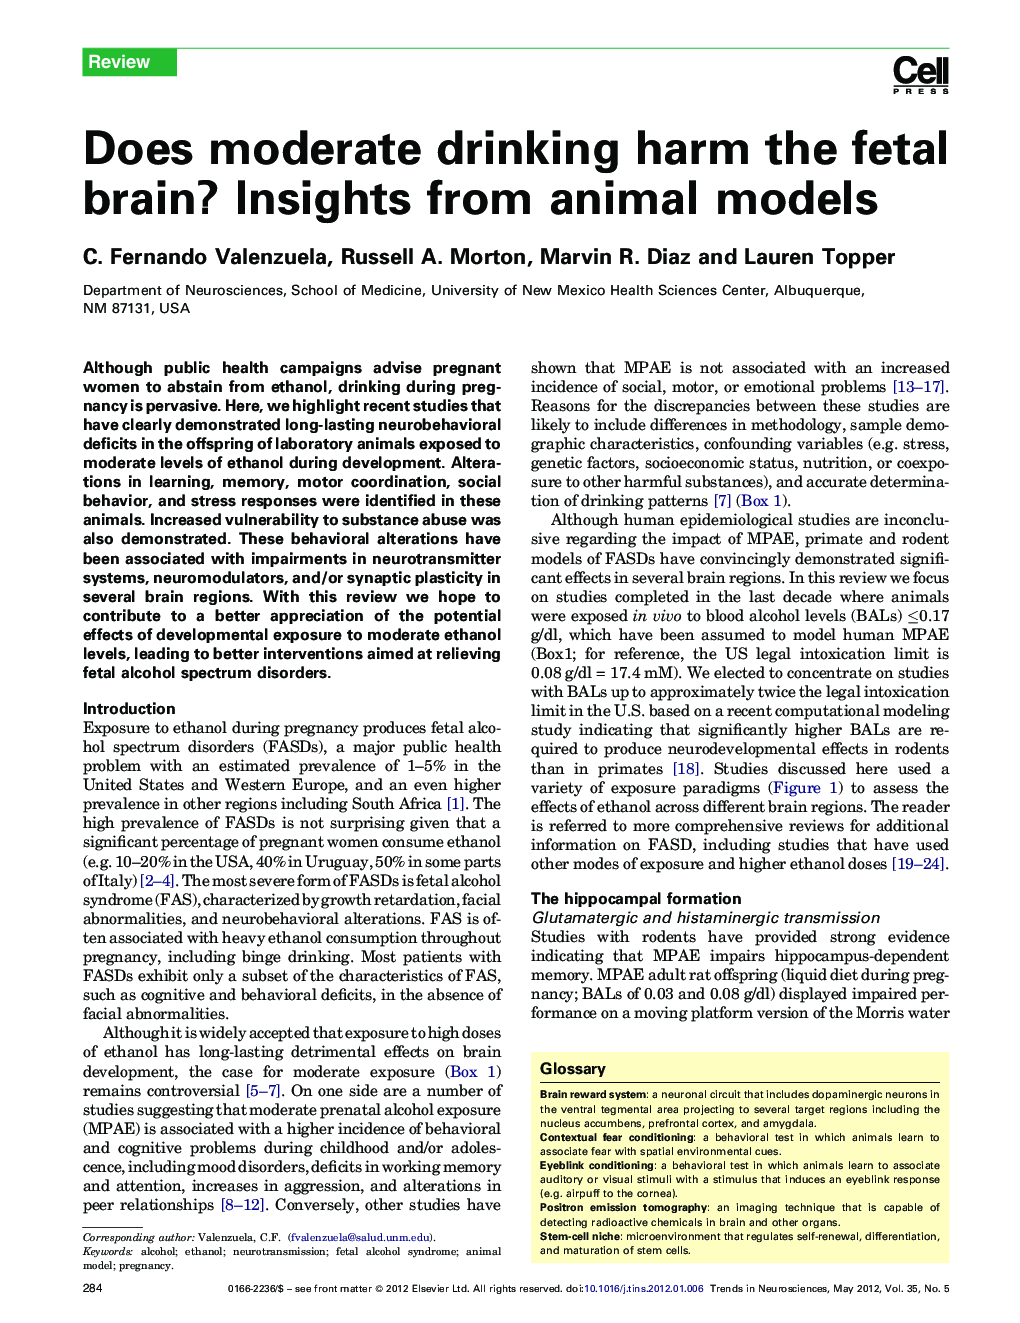 Does moderate drinking harm the fetal brain? Insights from animal models